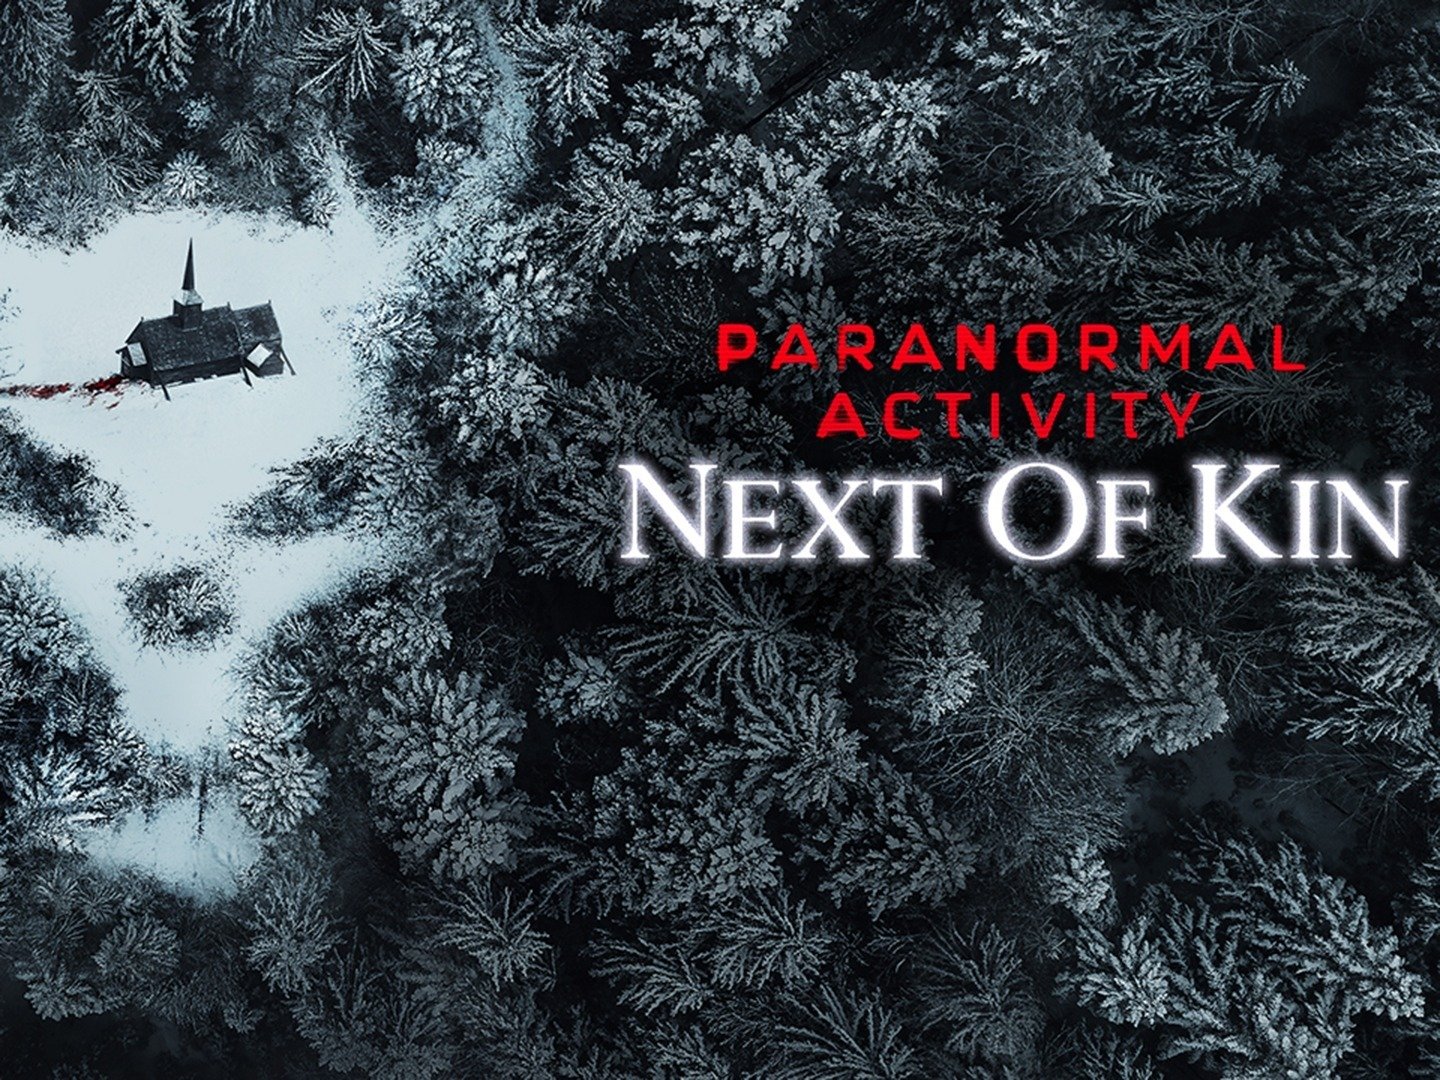 Paranormal Activity Next Of Kin Trailer 1 Trailers And Videos Rotten Tomatoes 